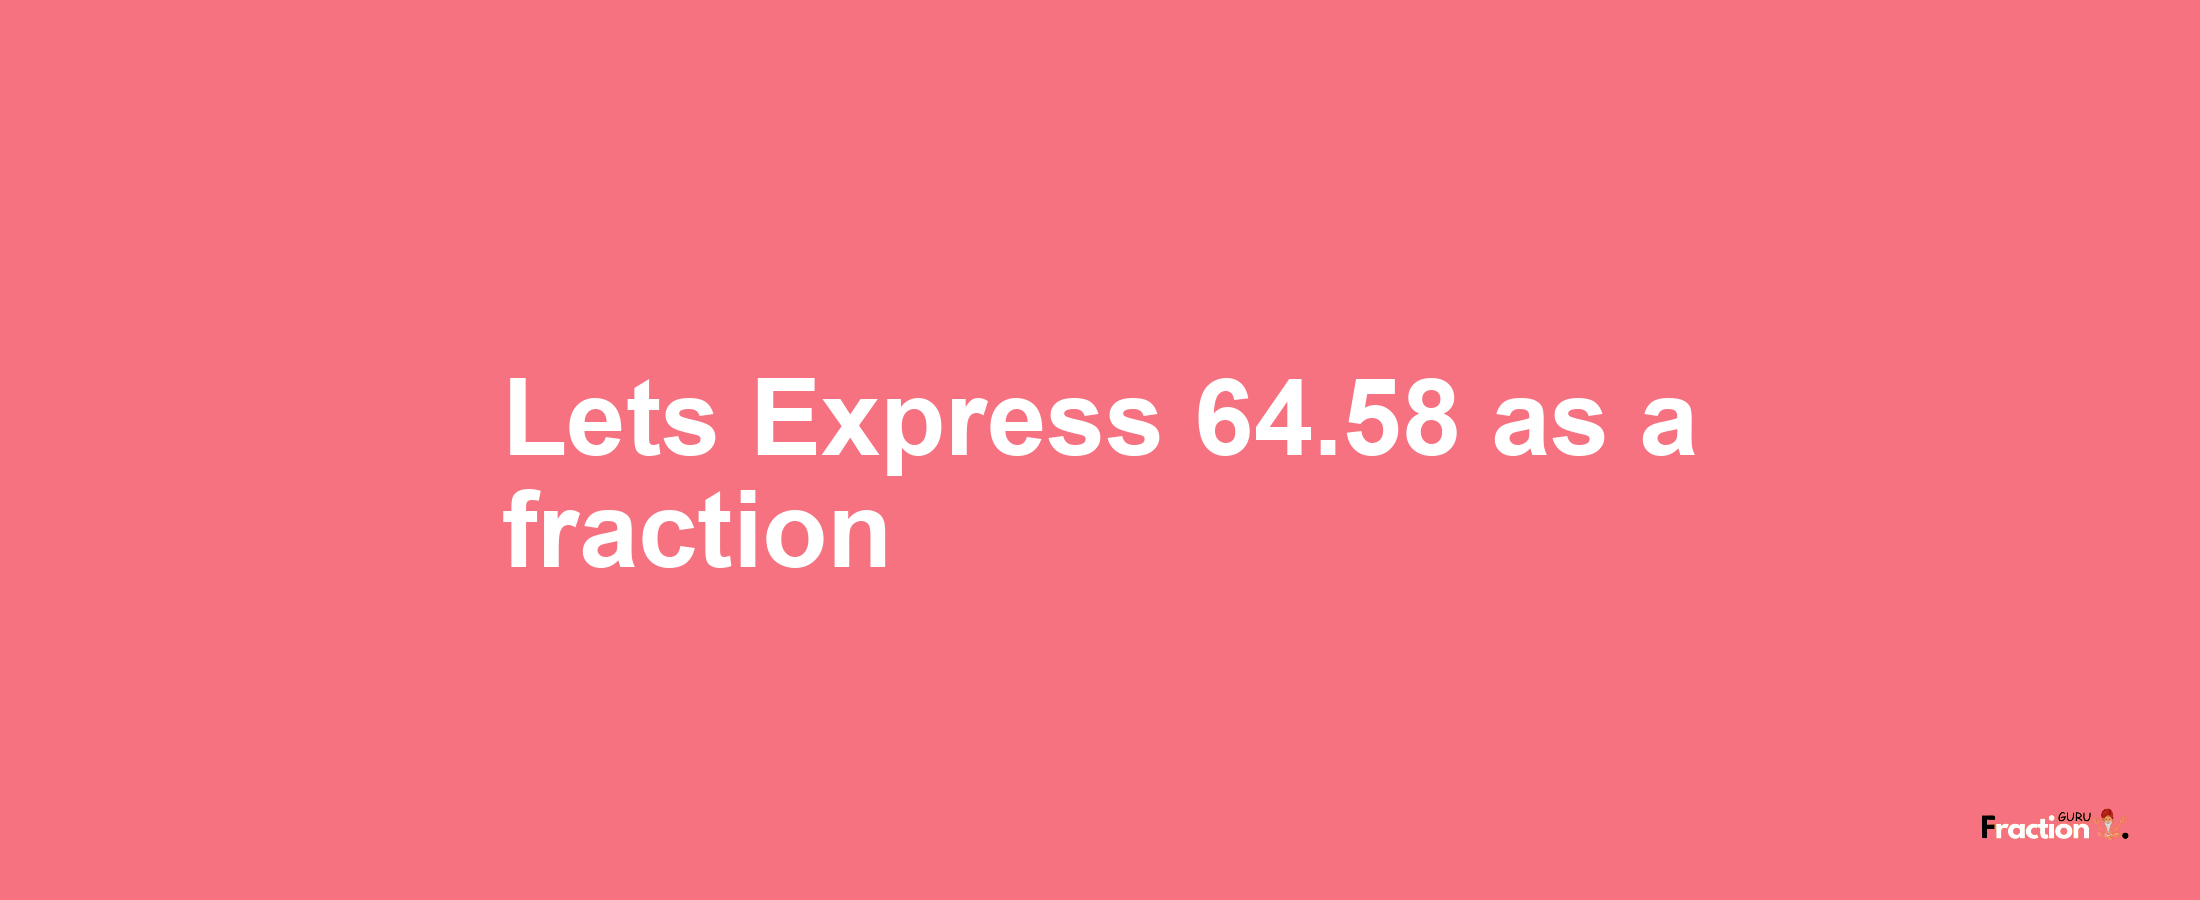 Lets Express 64.58 as afraction